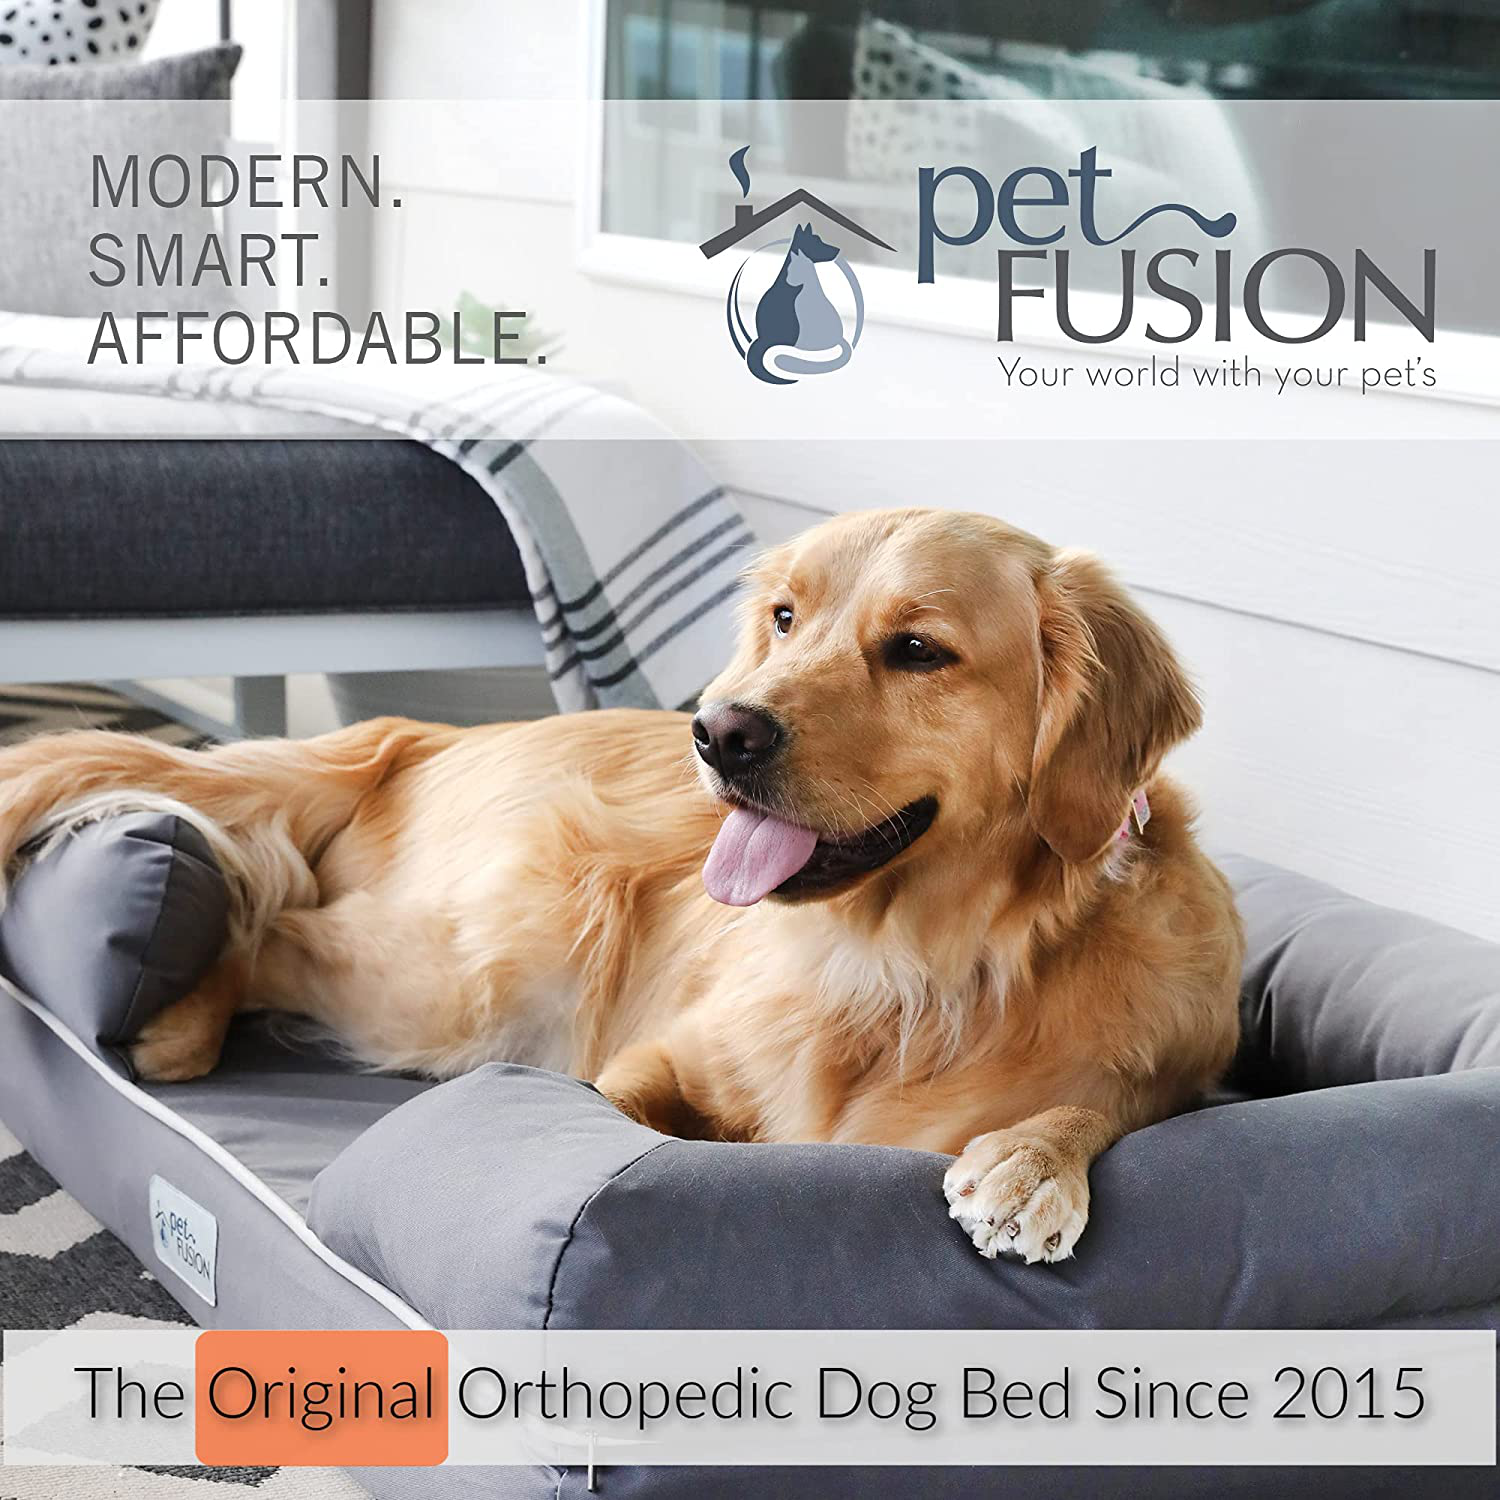 Petfusion Ultimate Orthopedic Dog Bed | Solid Certipur-Us Memory Foam | Multiple Sizes/Colors, Medium Firmness Bolster, Waterproof Liner, Breathable 35% Cotton Cover | Cert. Skin Safe | 3Yr Warranty